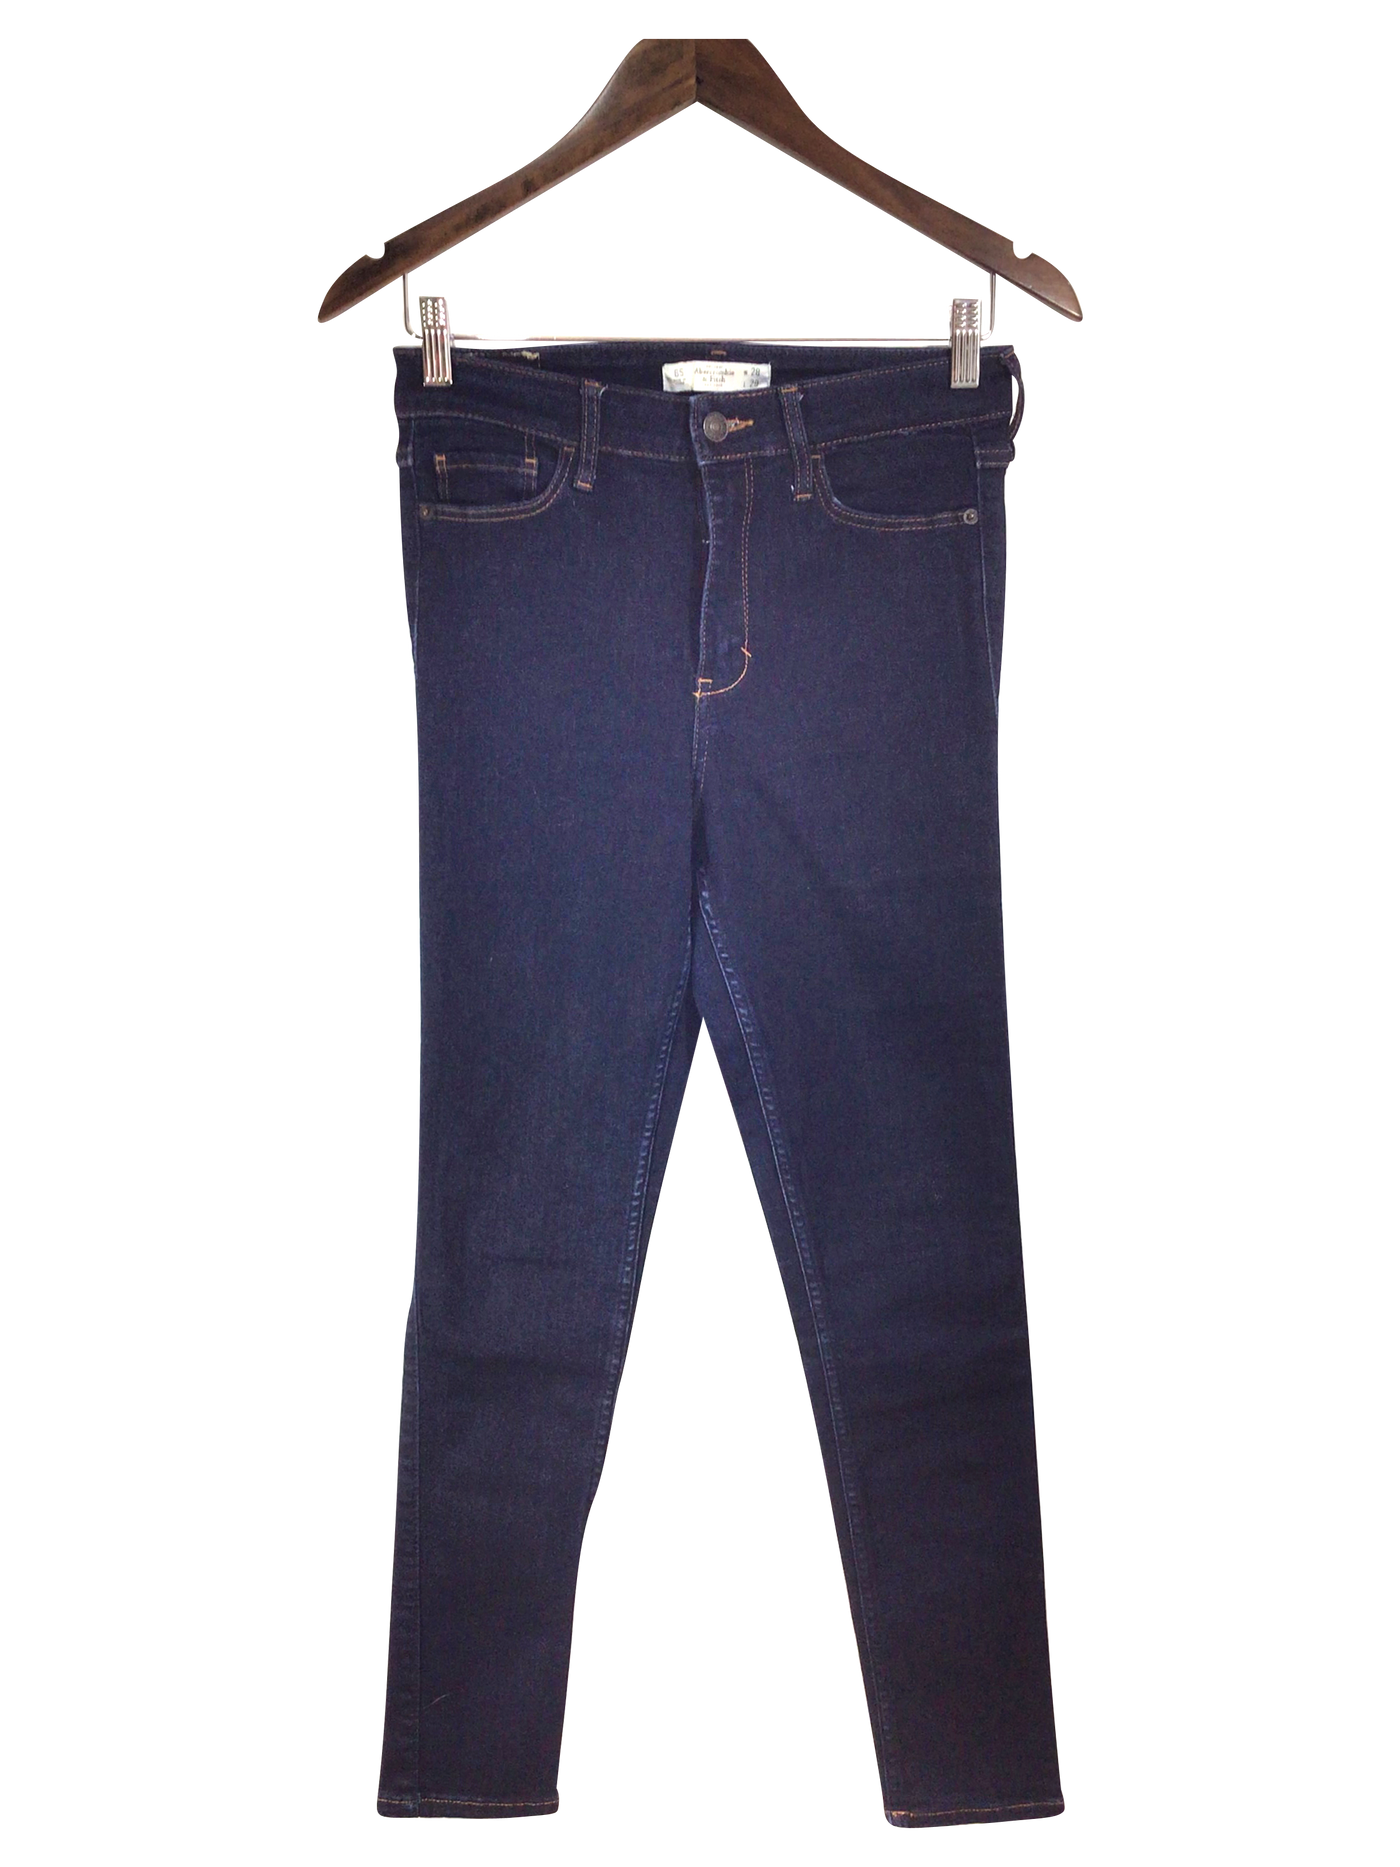 ABERCROMBIE & FITCH Straight-legged Jeans Regular fit in Blue - Size 28x29 | 34 $ KOOP